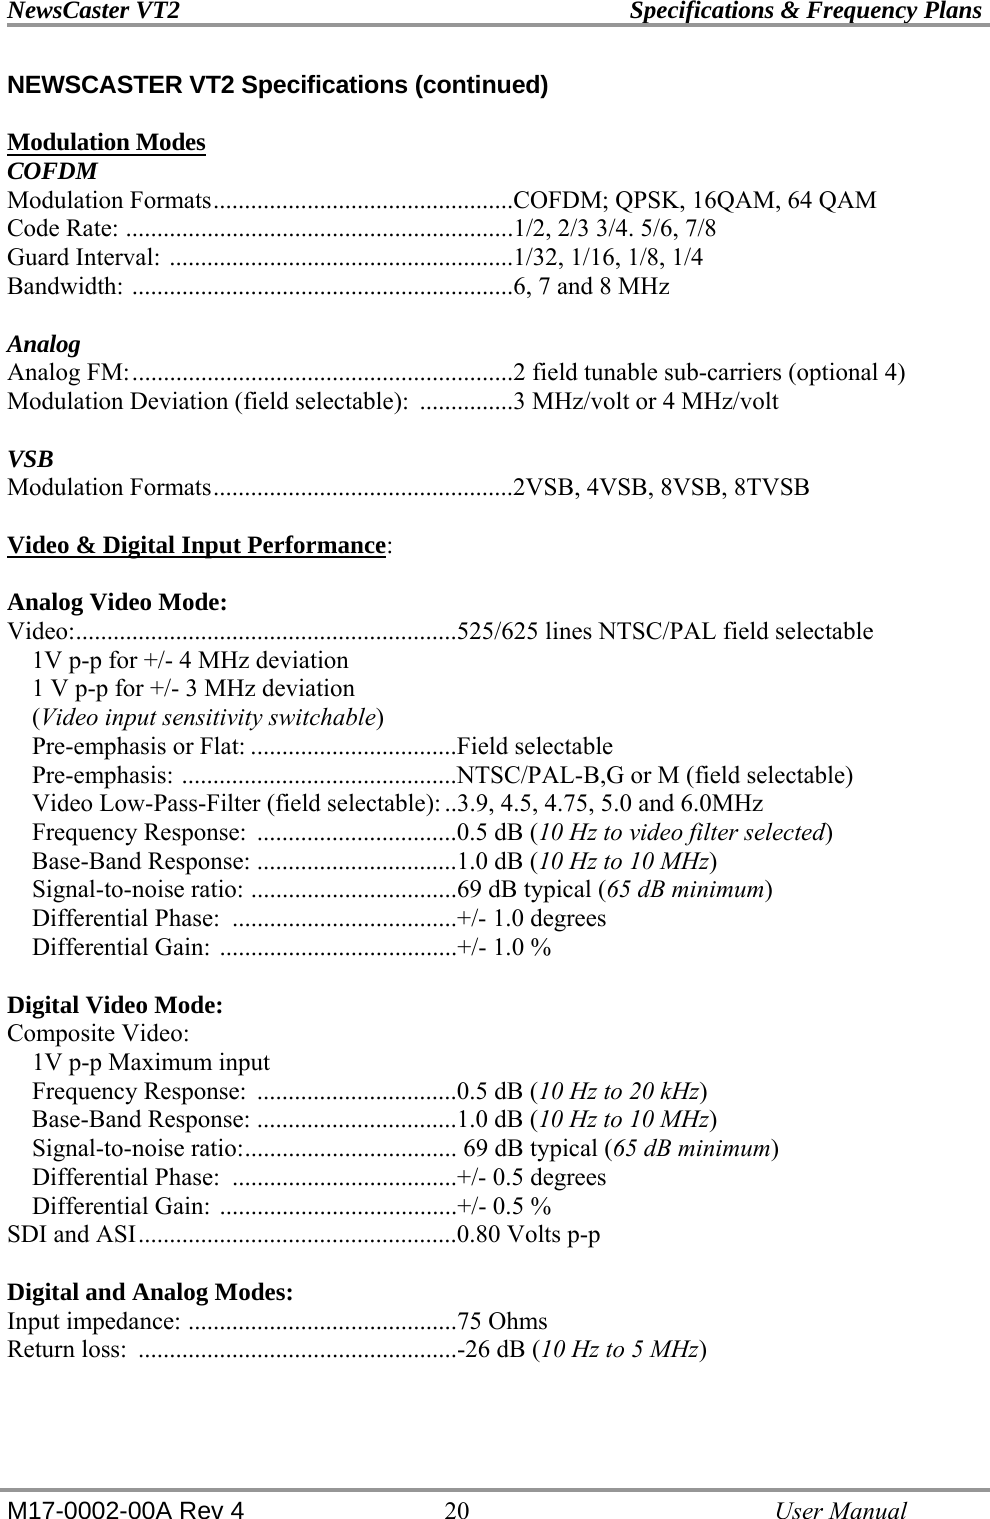 NewsCaster VT2    Specifications &amp; Frequency Plans  M17-0002-00A Rev 4 20   User Manual NEWSCASTER VT2 Specifications (continued)  Modulation Modes COFDM Modulation Formats................................................COFDM; QPSK, 16QAM, 64 QAM Code Rate: ..............................................................1/2, 2/3 3/4. 5/6, 7/8 Guard Interval: .......................................................1/32, 1/16, 1/8, 1/4  Bandwidth: .............................................................6, 7 and 8 MHz    Analog Analog FM:.............................................................2 field tunable sub-carriers (optional 4) Modulation Deviation (field selectable):  ...............3 MHz/volt or 4 MHz/volt  VSB Modulation Formats................................................2VSB, 4VSB, 8VSB, 8TVSB  Video &amp; Digital Input Performance:  Analog Video Mode: Video:.............................................................525/625 lines NTSC/PAL field selectable     1V p-p for +/- 4 MHz deviation     1 V p-p for +/- 3 MHz deviation     (Video input sensitivity switchable)     Pre-emphasis or Flat: .................................Field selectable     Pre-emphasis: ............................................NTSC/PAL-B,G or M (field selectable)     Video Low-Pass-Filter (field selectable): ..3.9, 4.5, 4.75, 5.0 and 6.0MHz     Frequency Response:  ................................0.5 dB (10 Hz to video filter selected)     Base-Band Response: ................................1.0 dB (10 Hz to 10 MHz)     Signal-to-noise ratio: .................................69 dB typical (65 dB minimum)     Differential Phase:  ....................................+/- 1.0 degrees     Differential Gain: ......................................+/- 1.0 %  Digital Video Mode: Composite Video:     1V p-p Maximum input     Frequency Response:  ................................0.5 dB (10 Hz to 20 kHz)     Base-Band Response: ................................1.0 dB (10 Hz to 10 MHz)     Signal-to-noise ratio:.................................. 69 dB typical (65 dB minimum)     Differential Phase:  ....................................+/- 0.5 degrees     Differential Gain: ......................................+/- 0.5 % SDI and ASI...................................................0.80 Volts p-p  Digital and Analog Modes: Input impedance: ...........................................75 Ohms Return loss:  ...................................................-26 dB (10 Hz to 5 MHz) 